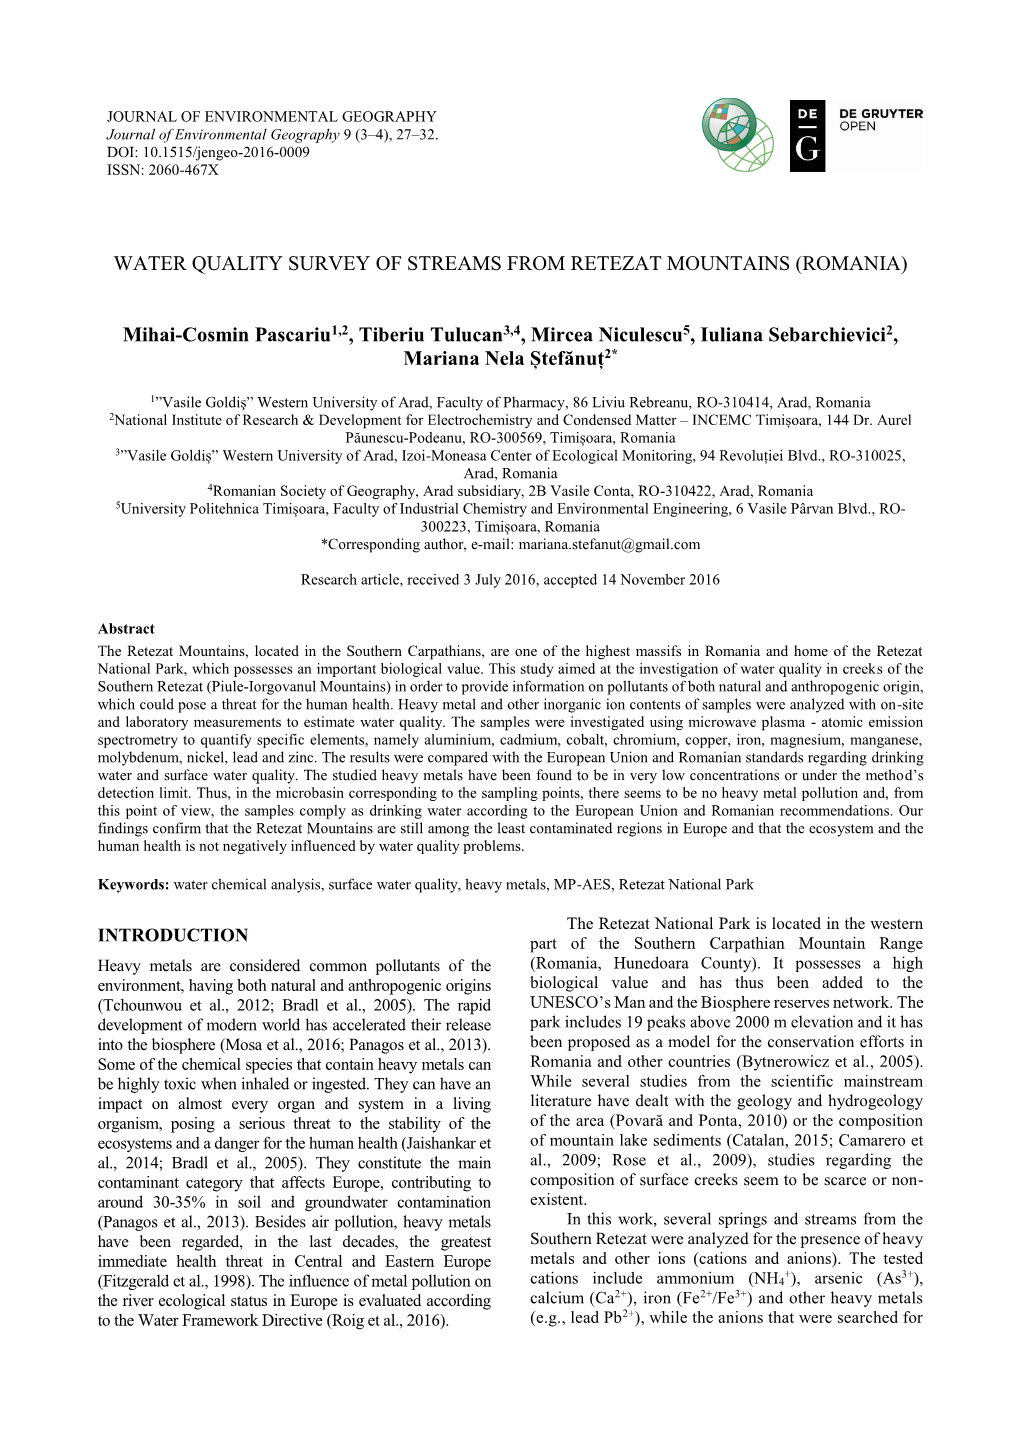 Water Quality Survey of Streams from Retezat Mountains (Romania)